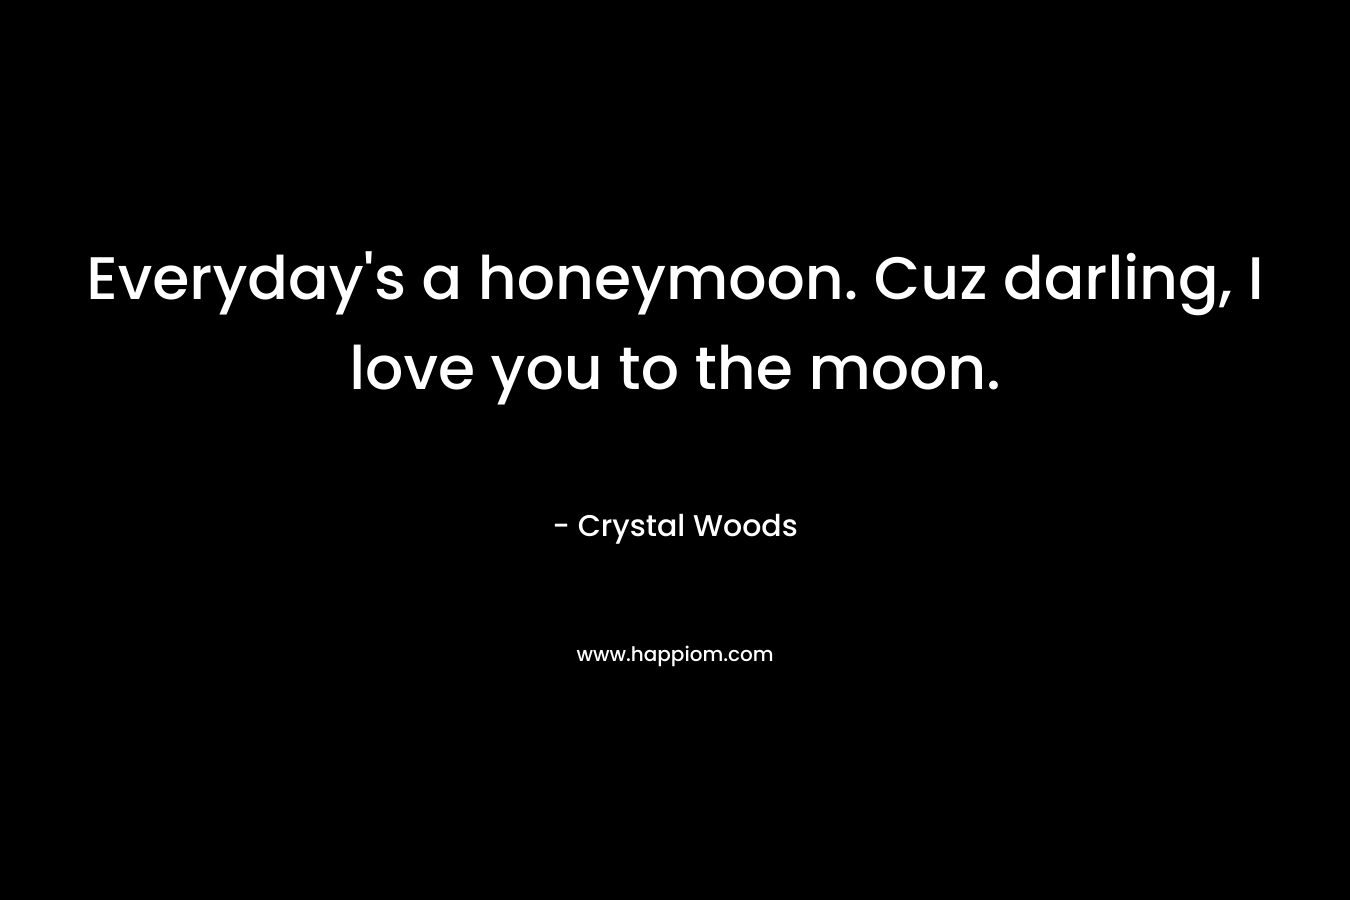 Everyday’s a honeymoon. Cuz darling, I love you to the moon. – Crystal Woods